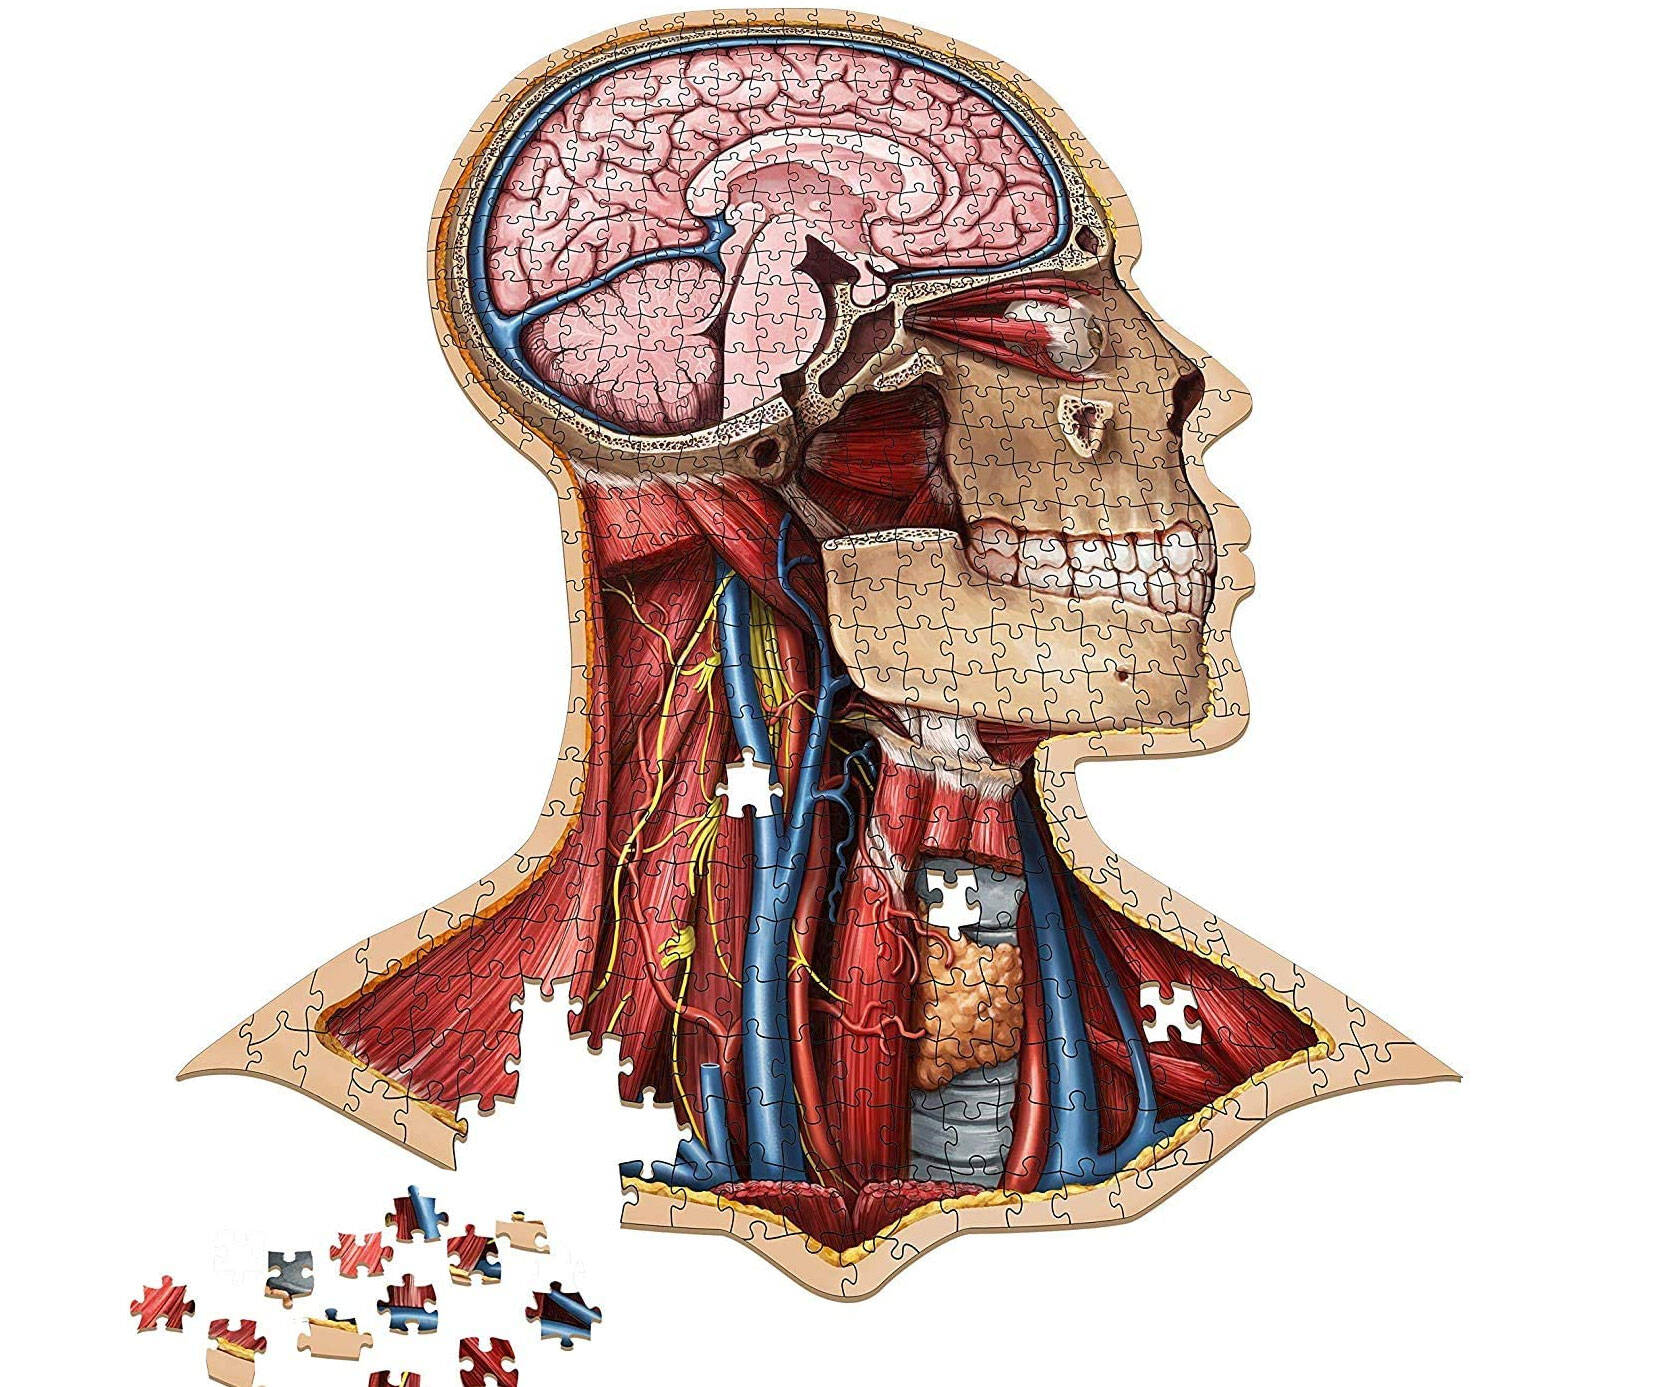 Human Anatomy Jigsaw Puzzle - //coolthings.us